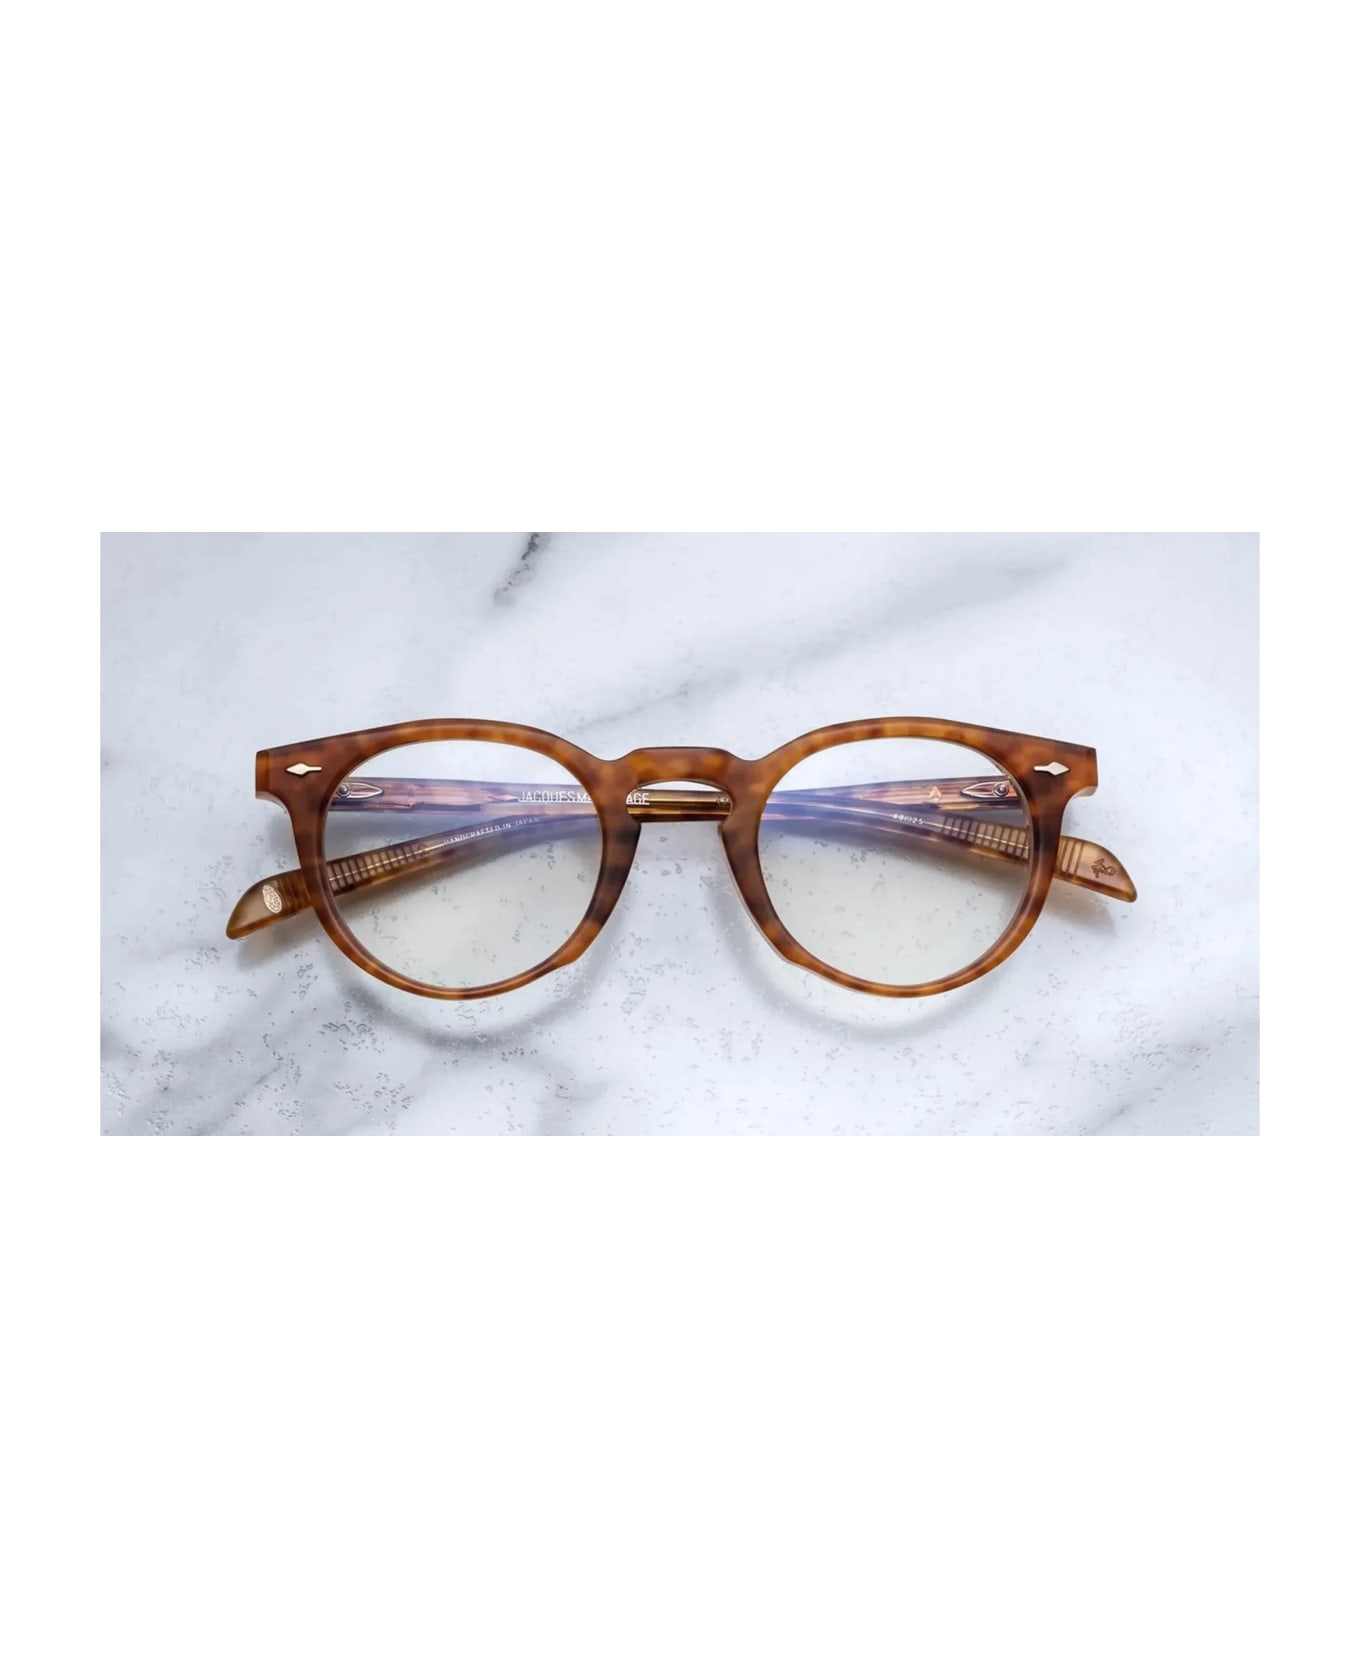 Jacques Marie Mage Percier - Camel Glasses - brown アイウェア